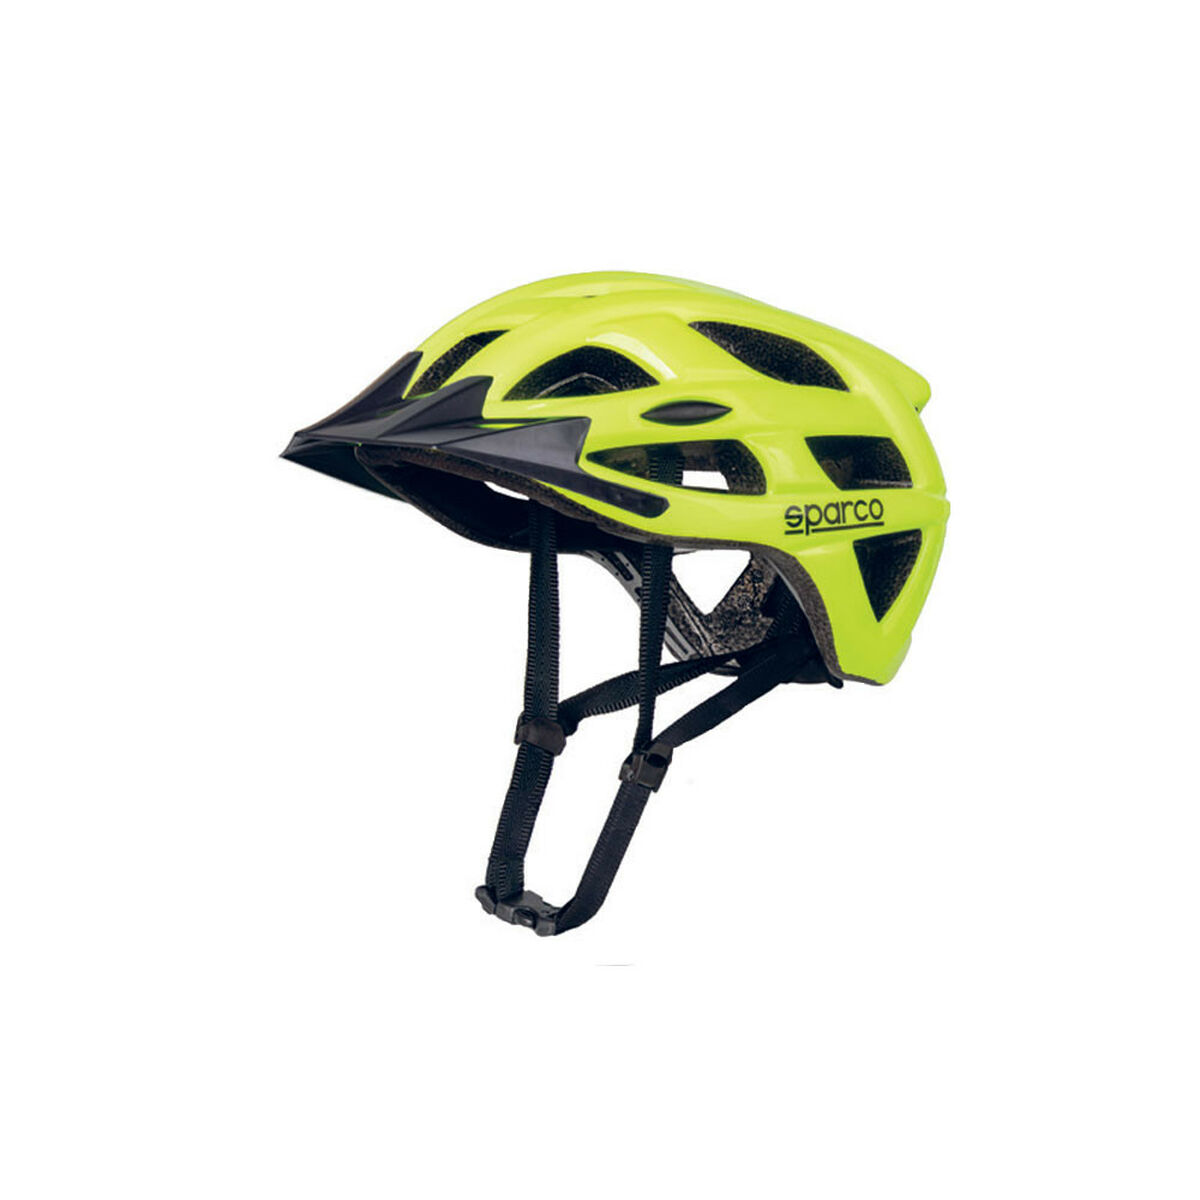 Adult's Cycling Helmet Sparco S099116GF3L L Yellow